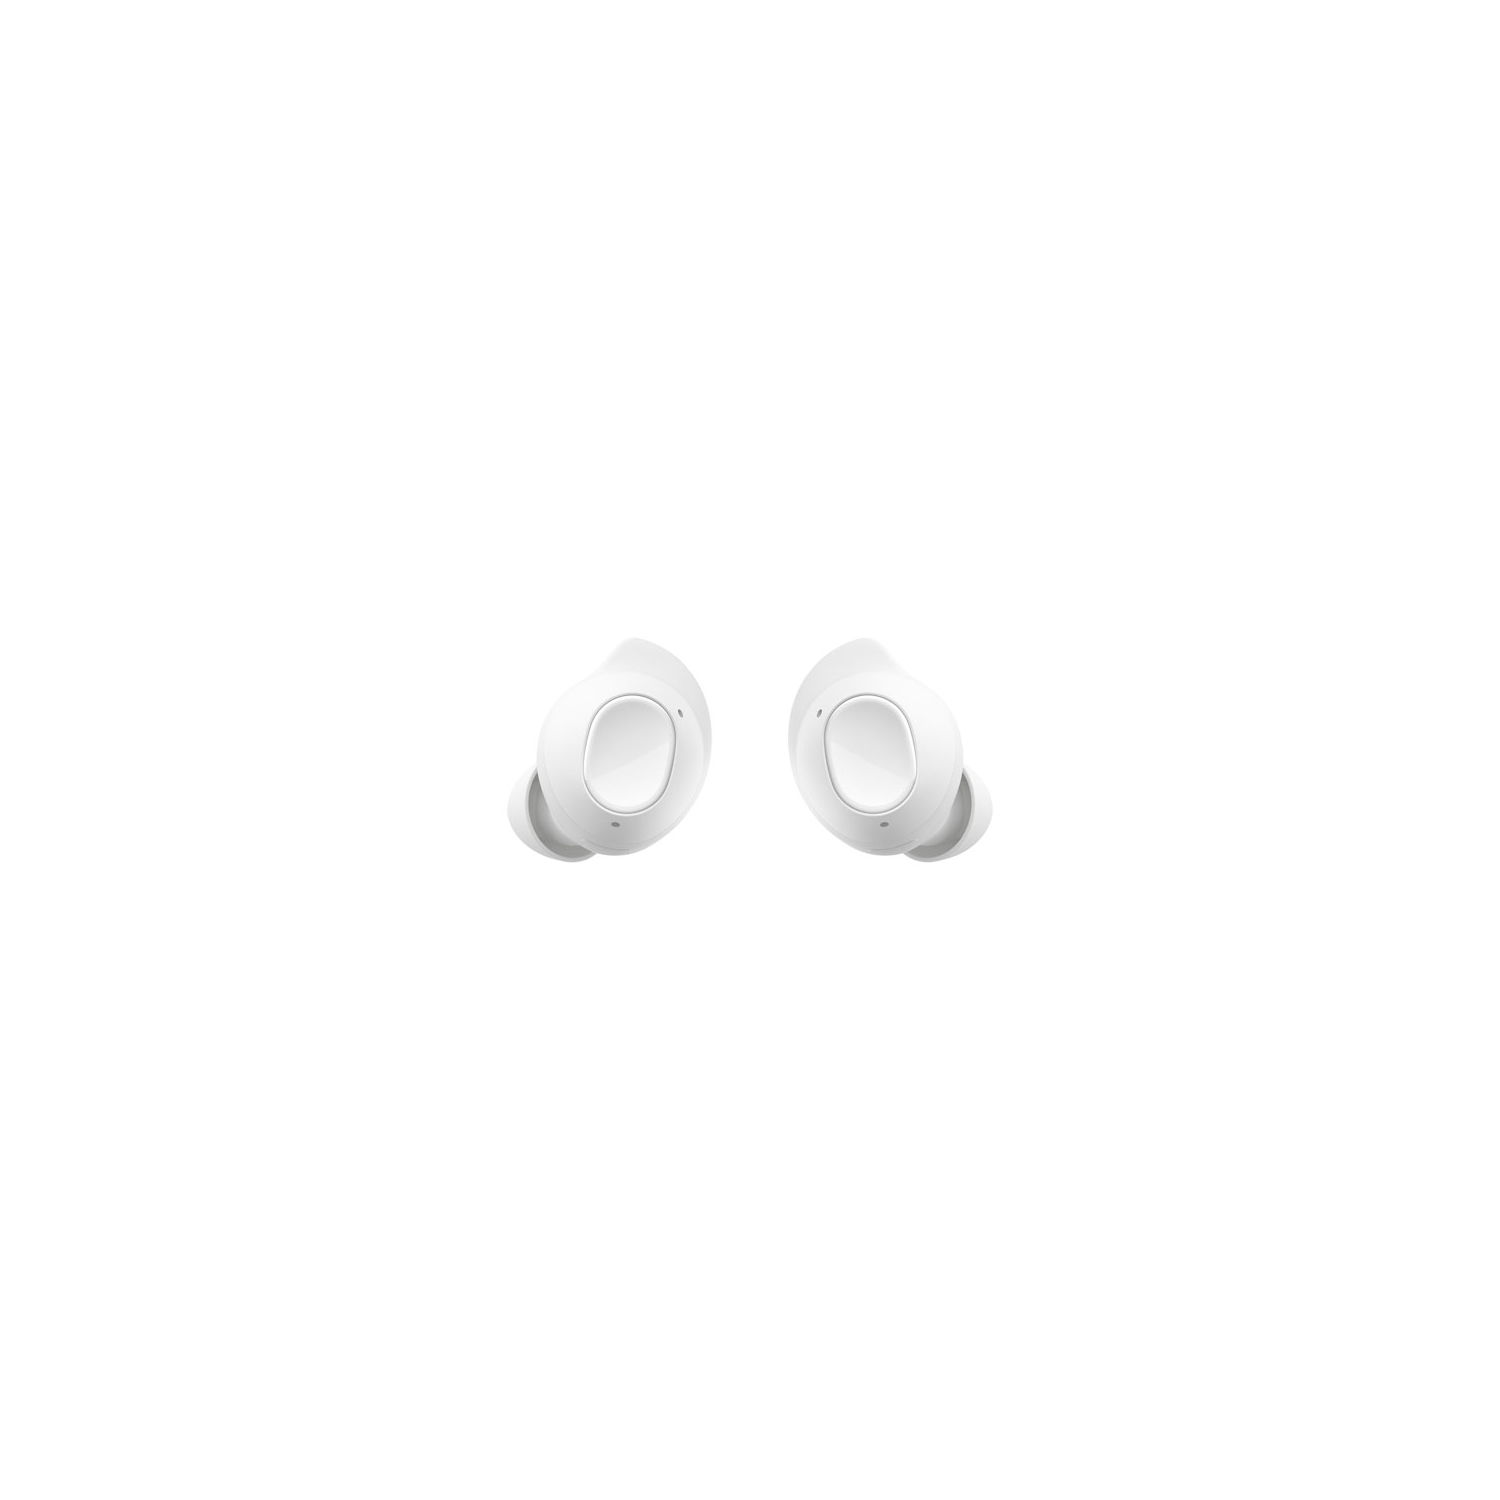 Refurbished (Excellent) - Samsung Galaxy Buds FE In-Ear Noise Cancelling True Wireless Earbuds - Mystic White